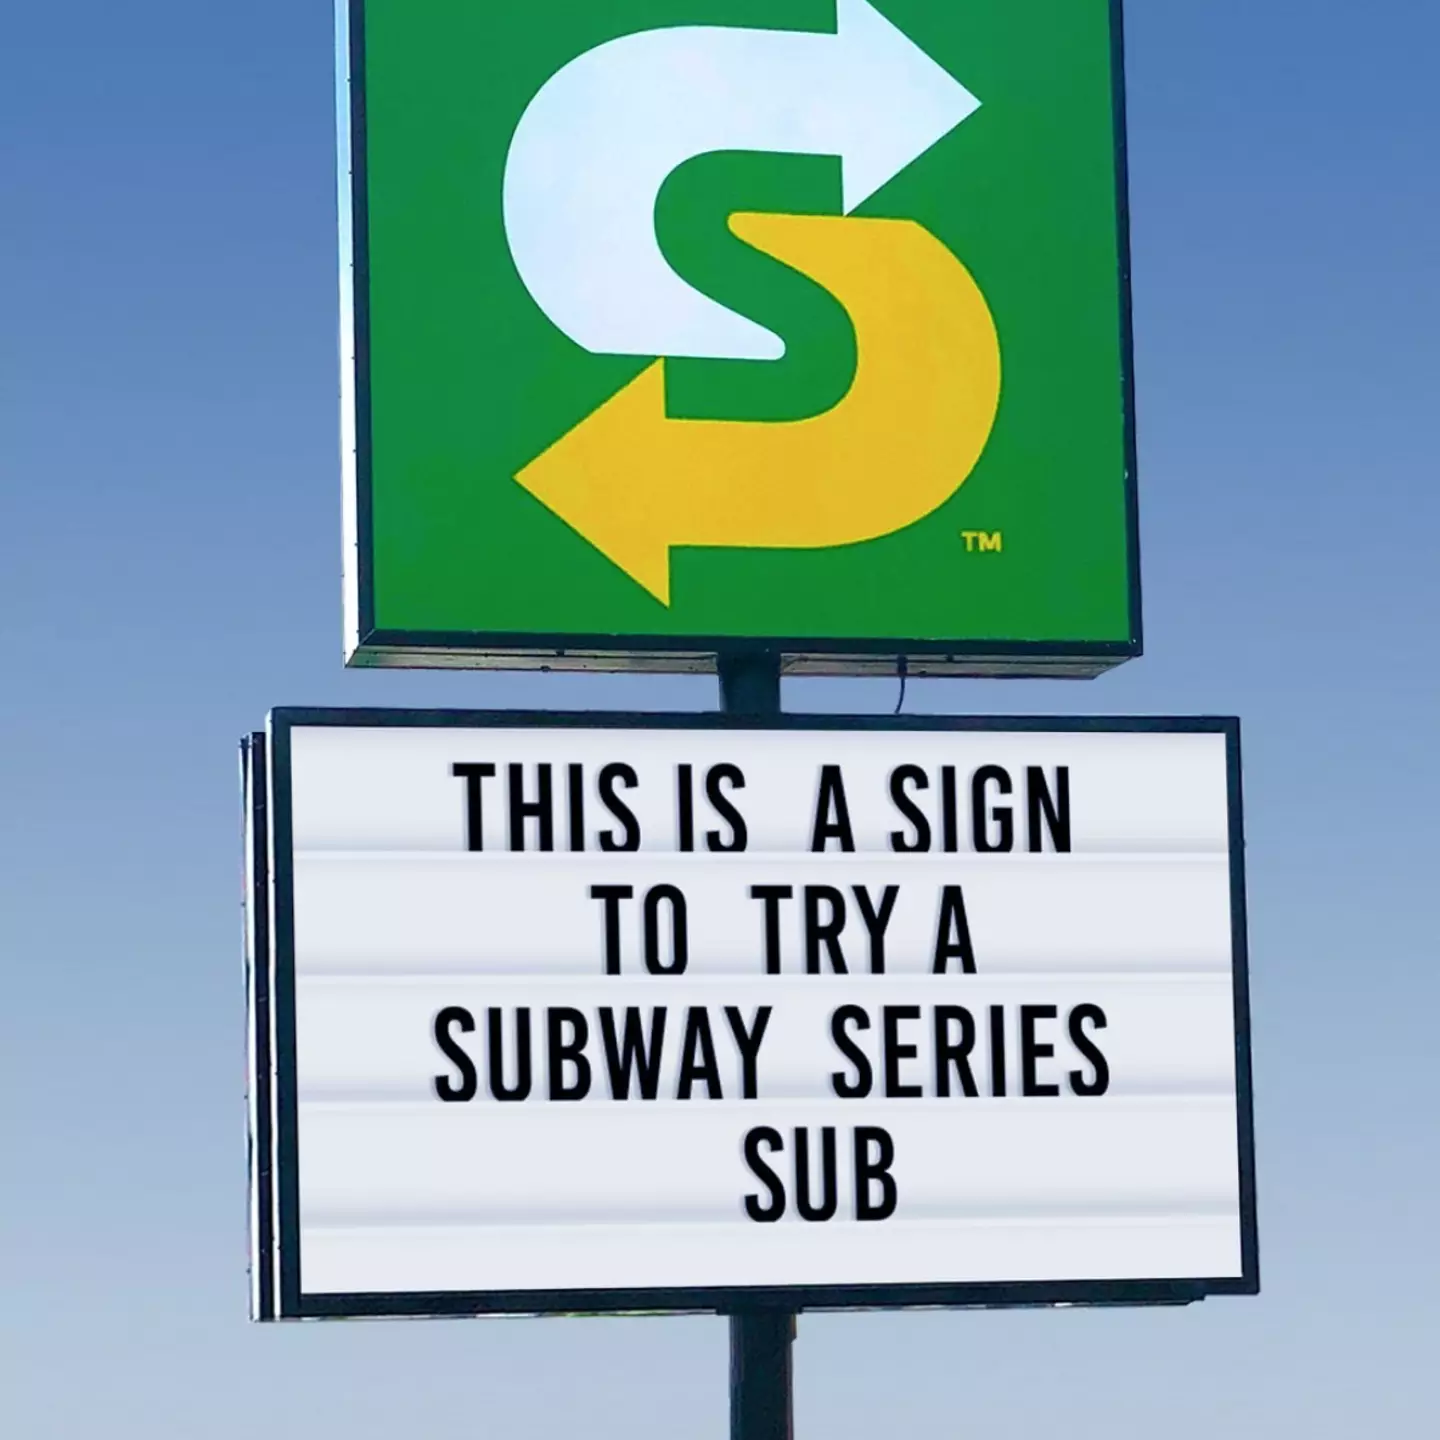 All Subway franchises will be forced to accept digital discounts as of December 28.